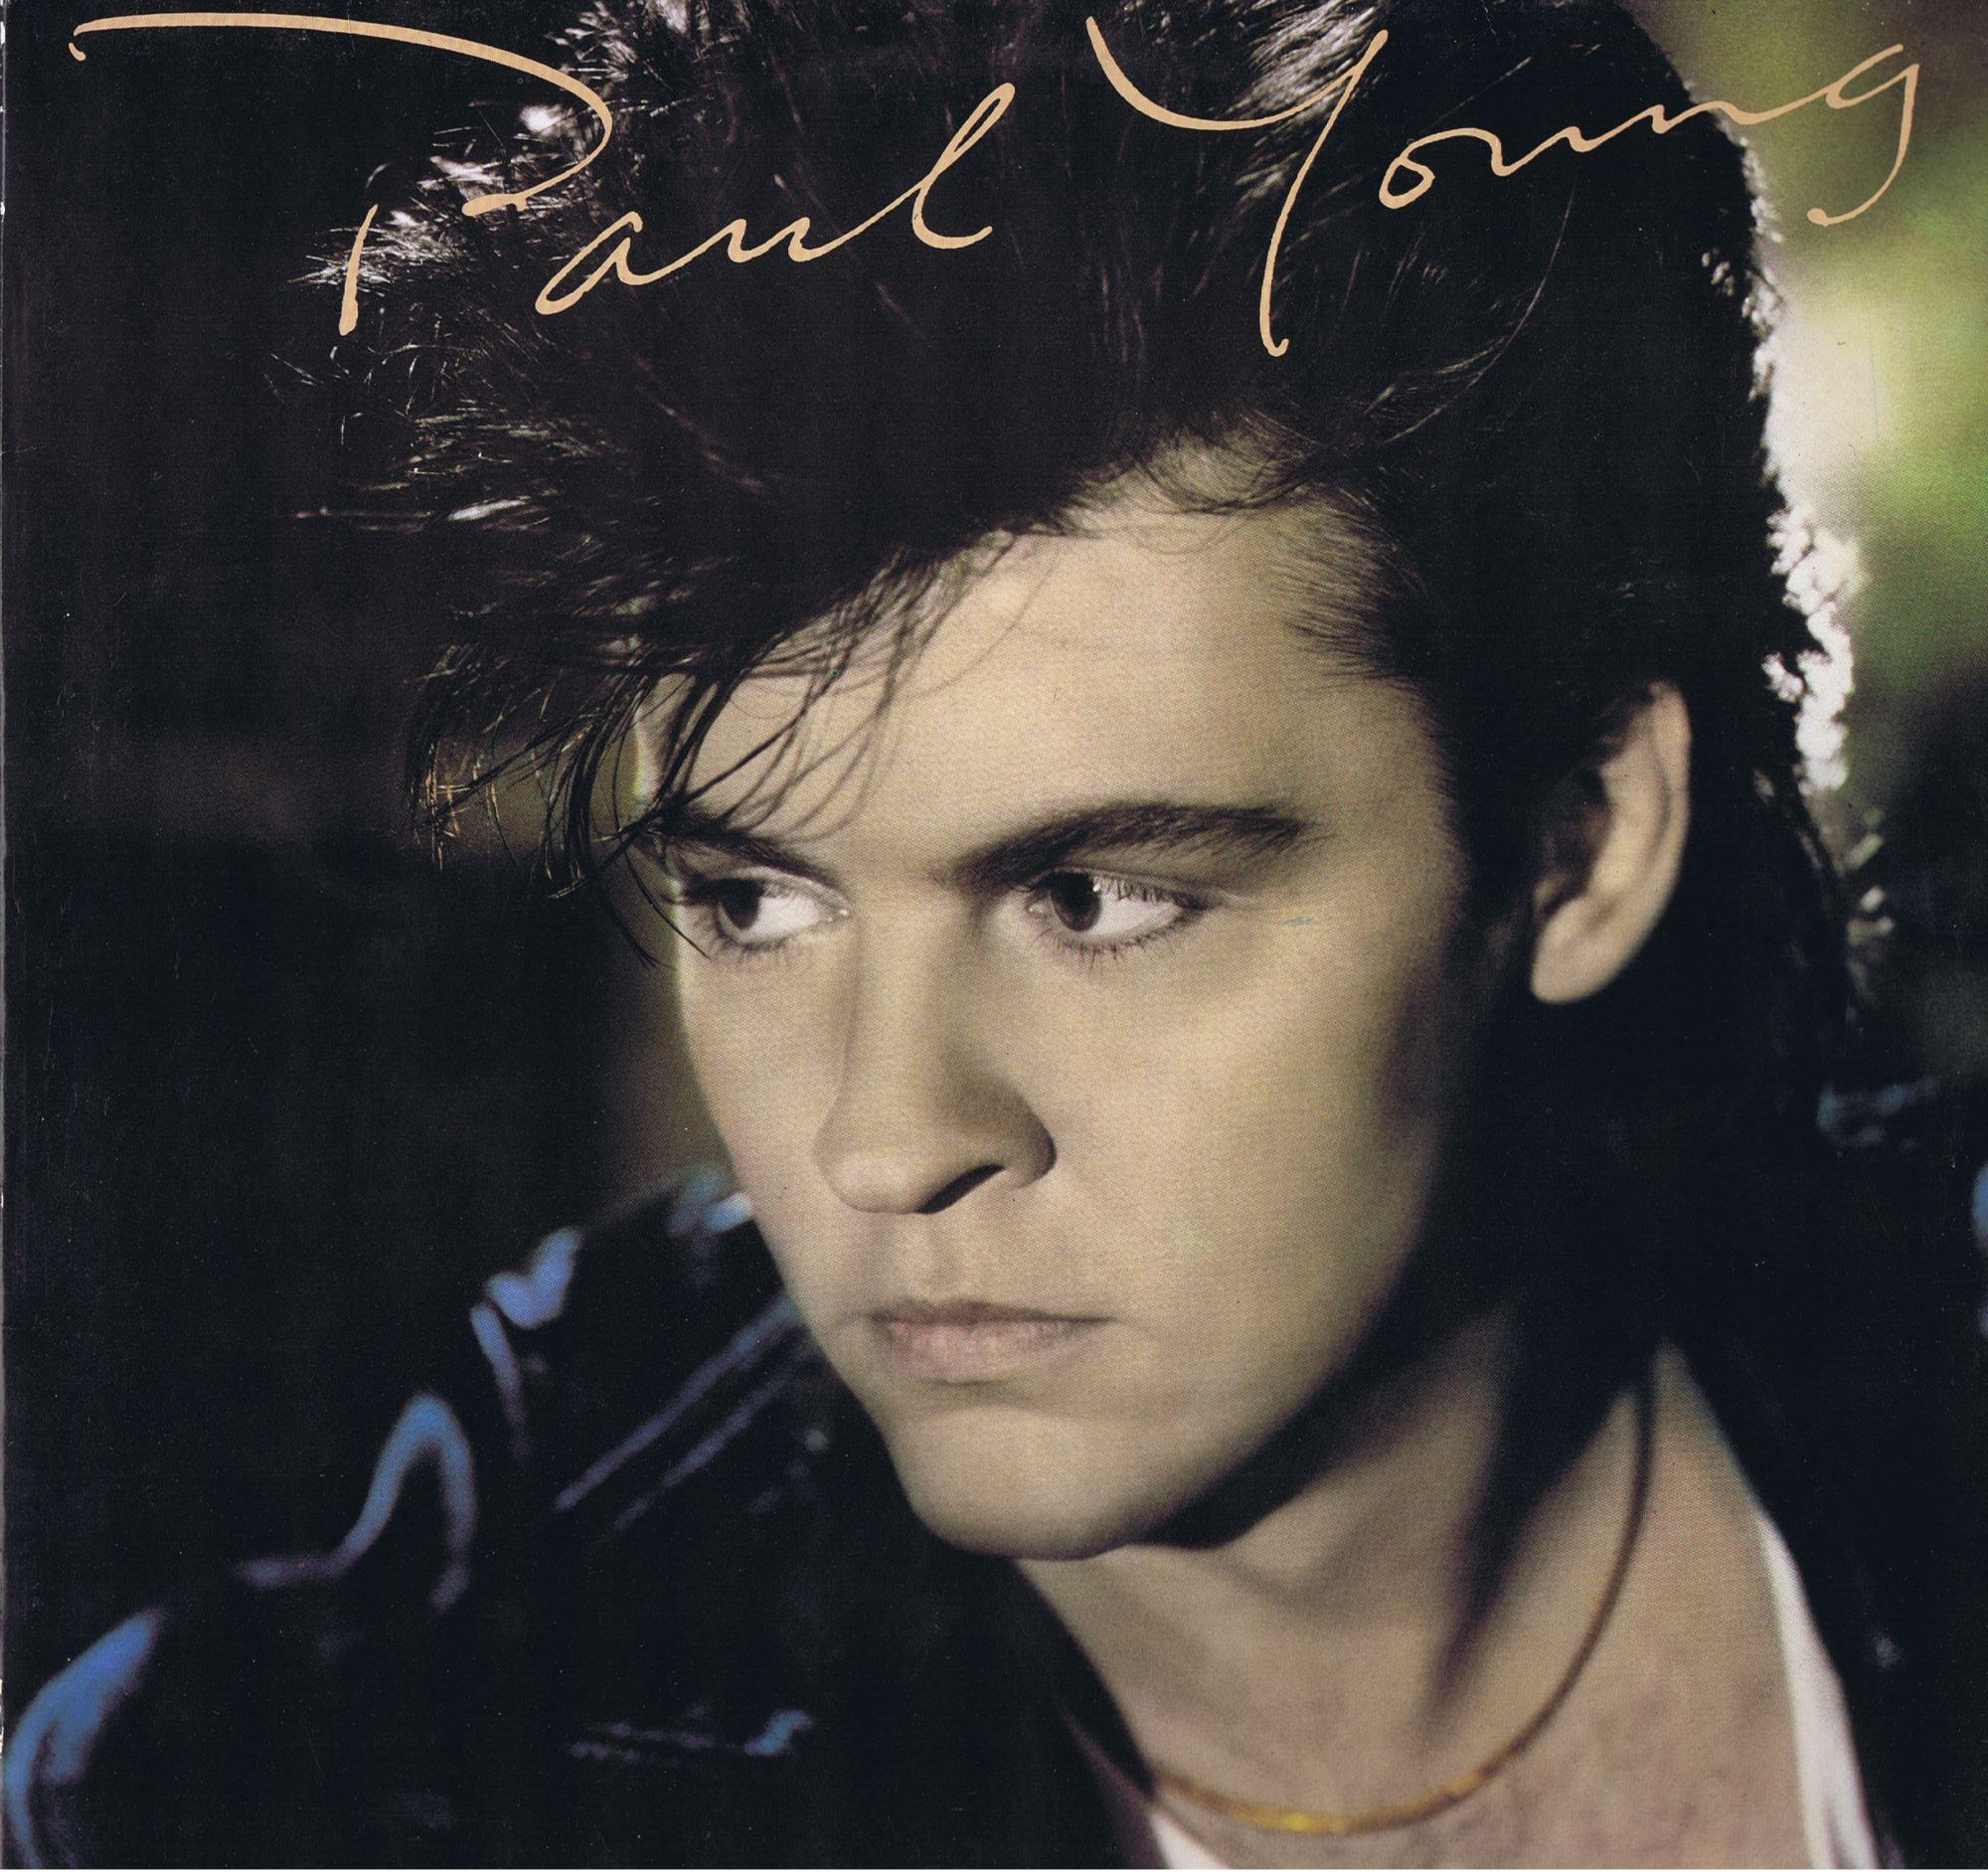 Paul Young Everytime You Go Away